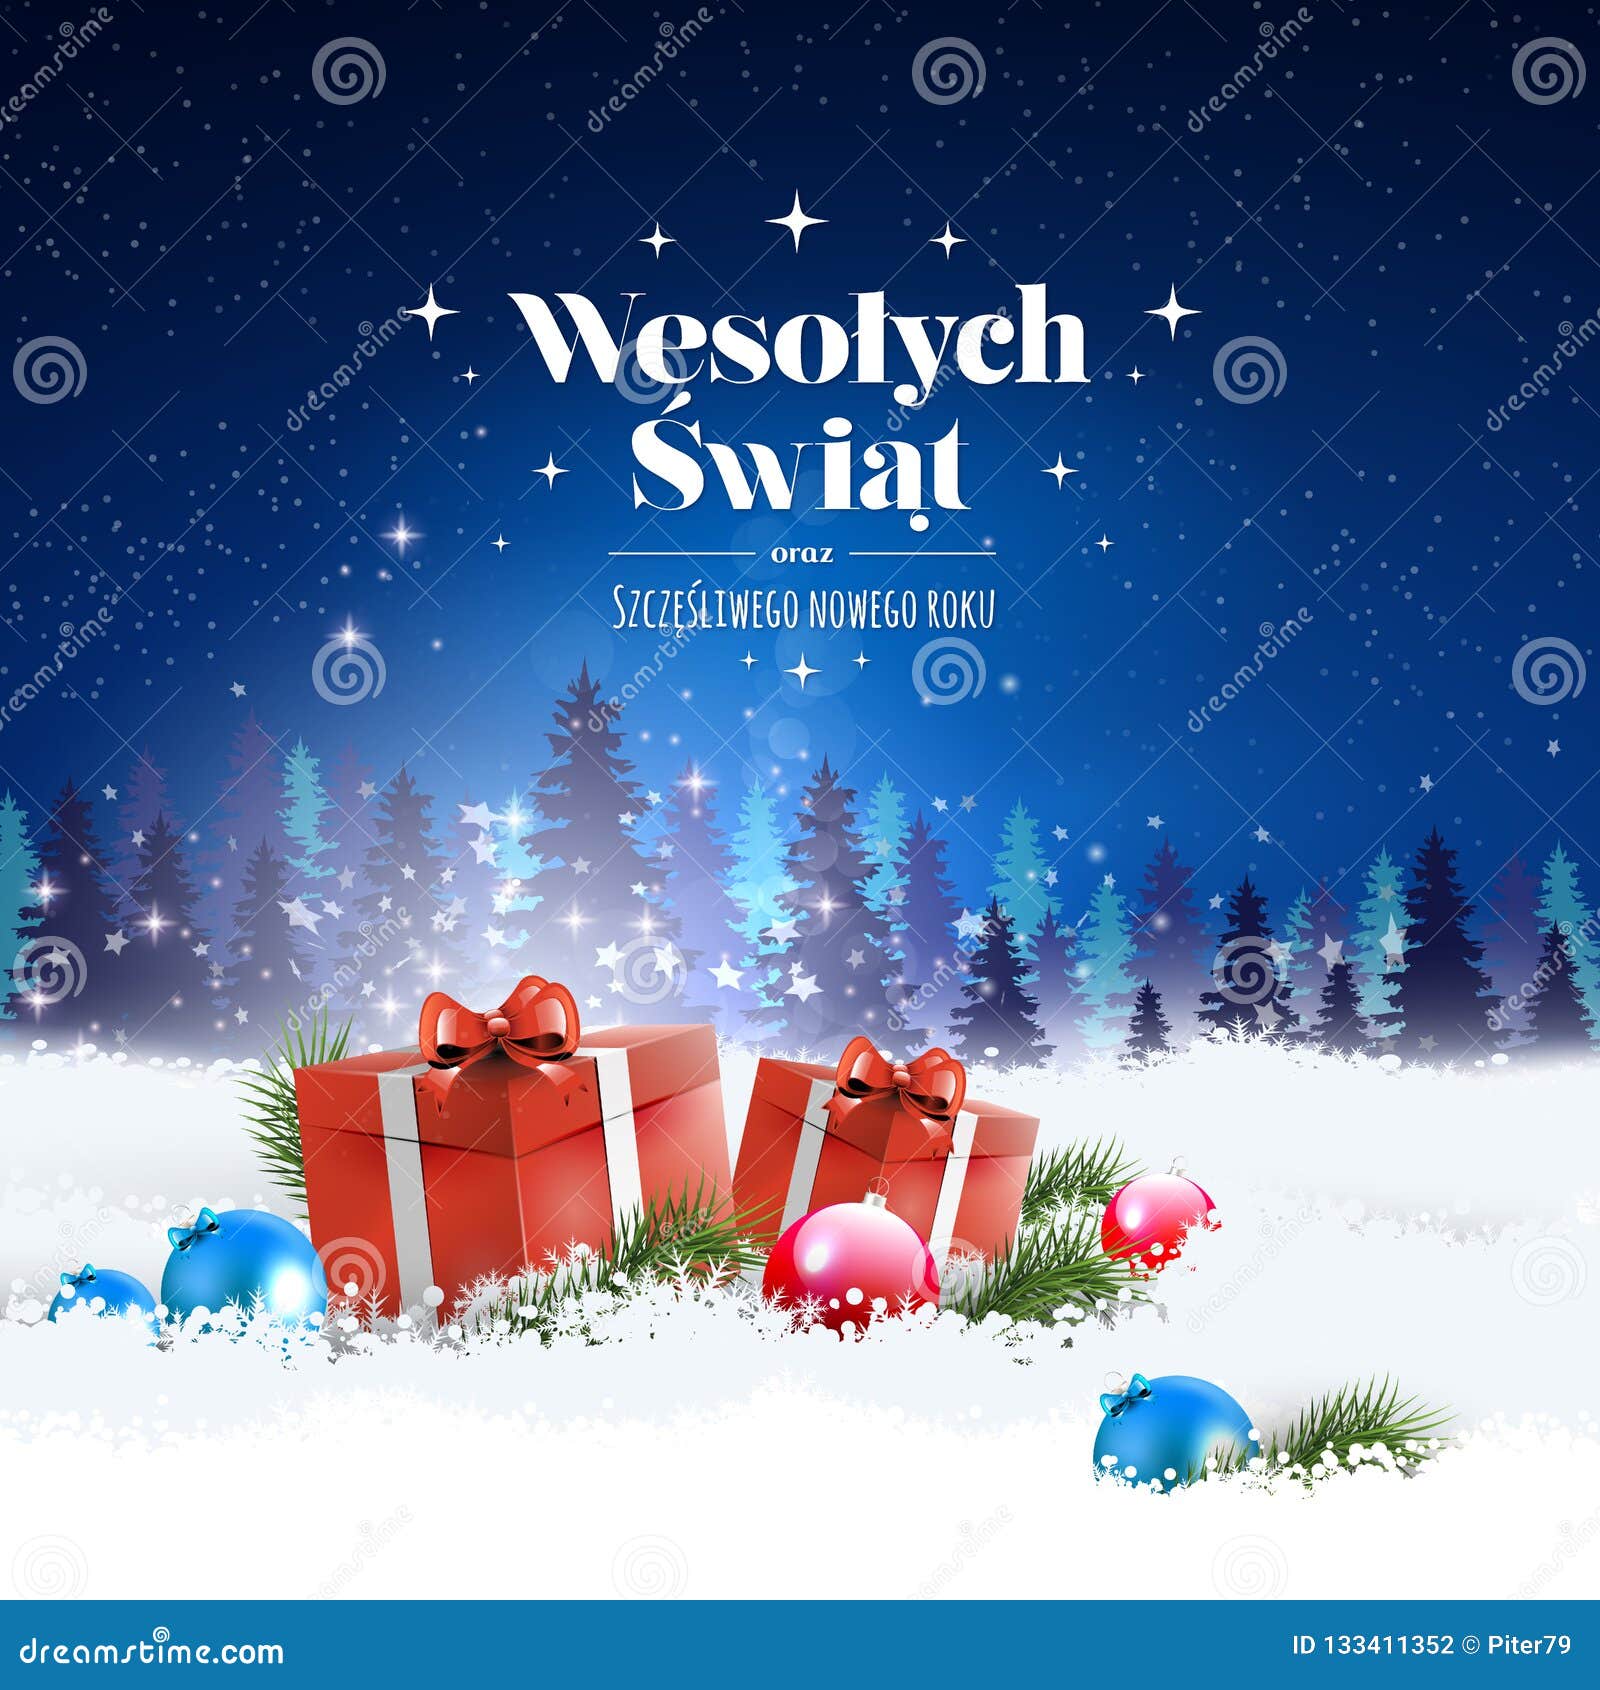 Albums 101+ Images merry christmas and happy new year in polish Stunning